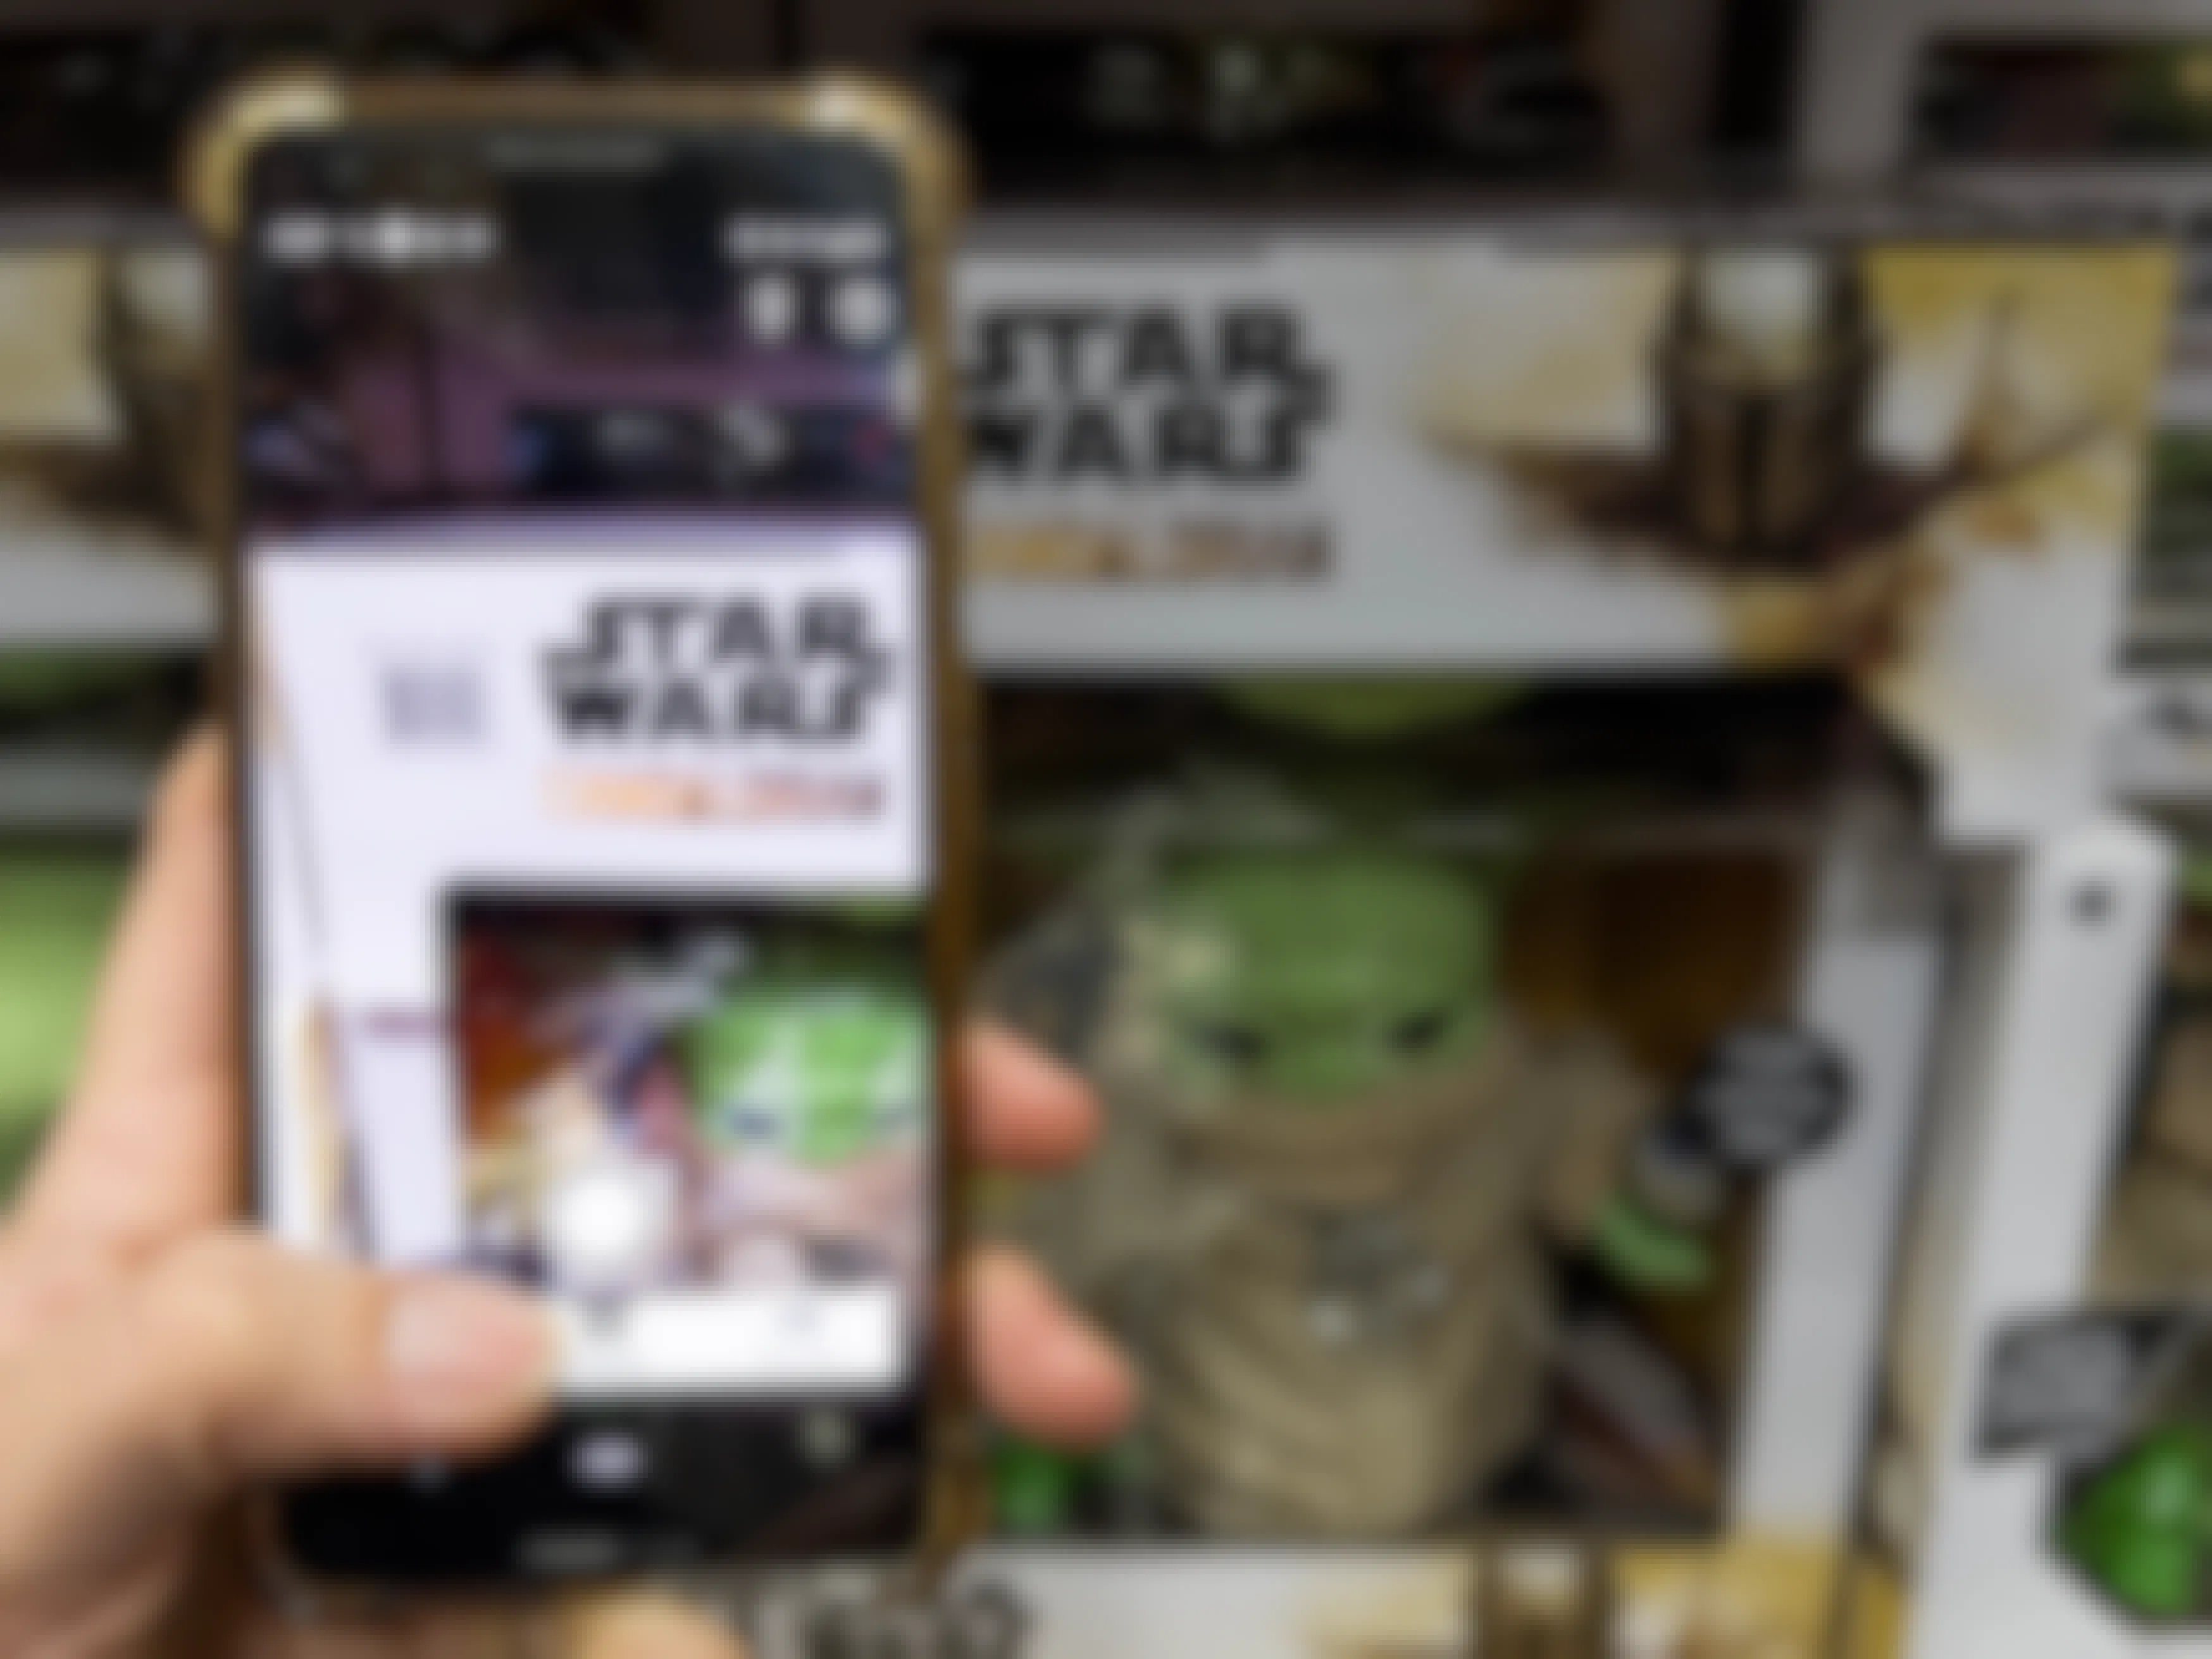 A person holding their phone, scanning a Star Wars Mandalorian toy with the Amazon mobile app.